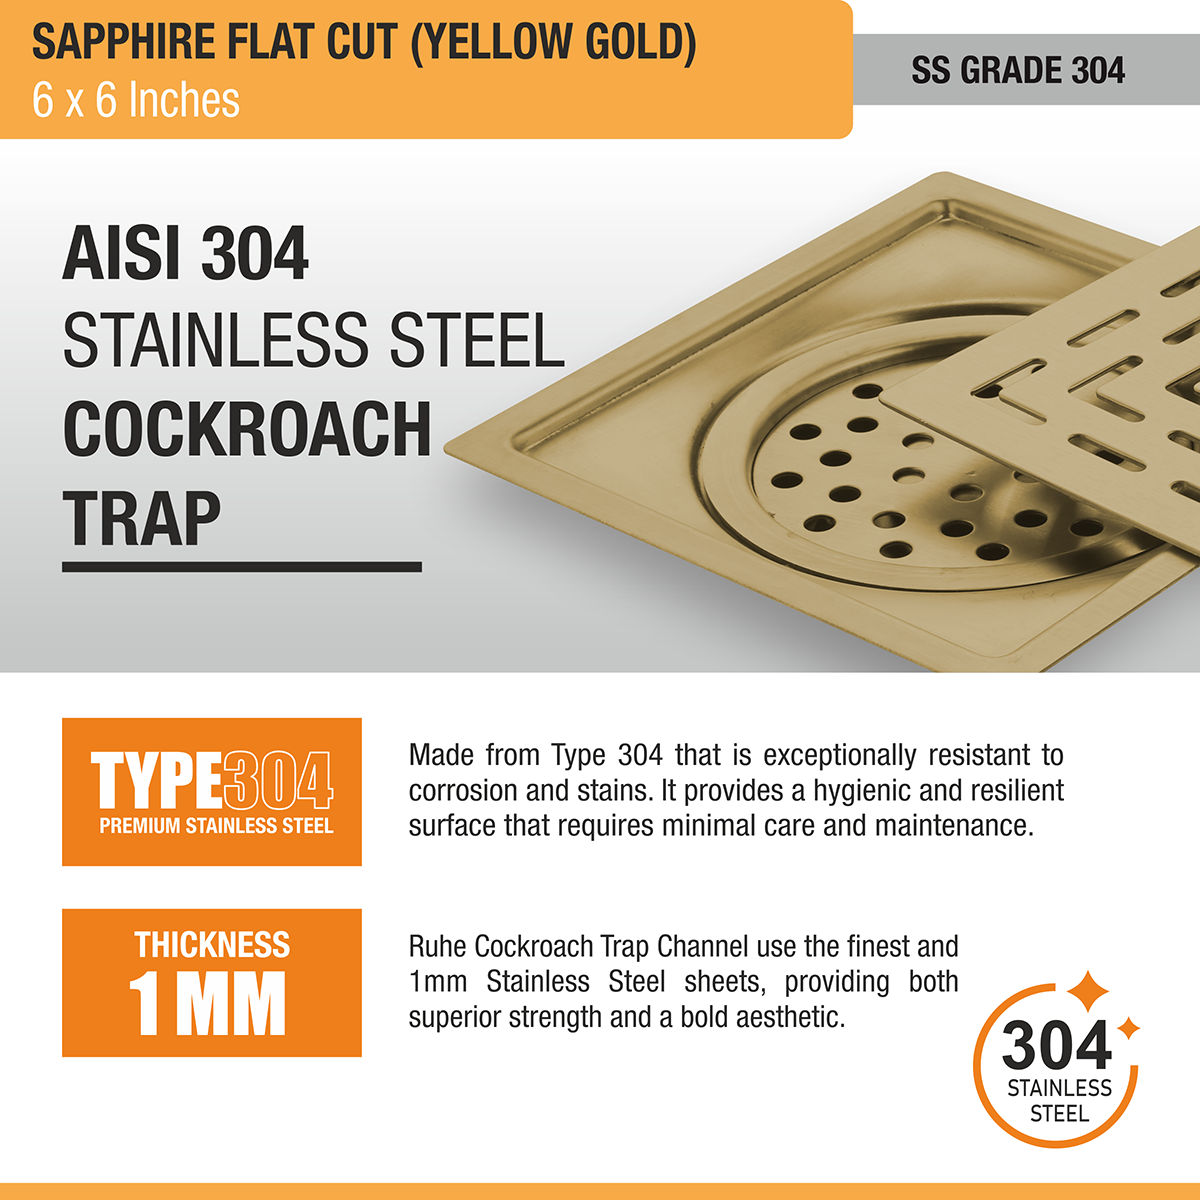 Sapphire Square Flat Cut Floor Drain in Yellow Gold PVD Coating (6 x 6 Inches) stainless steel